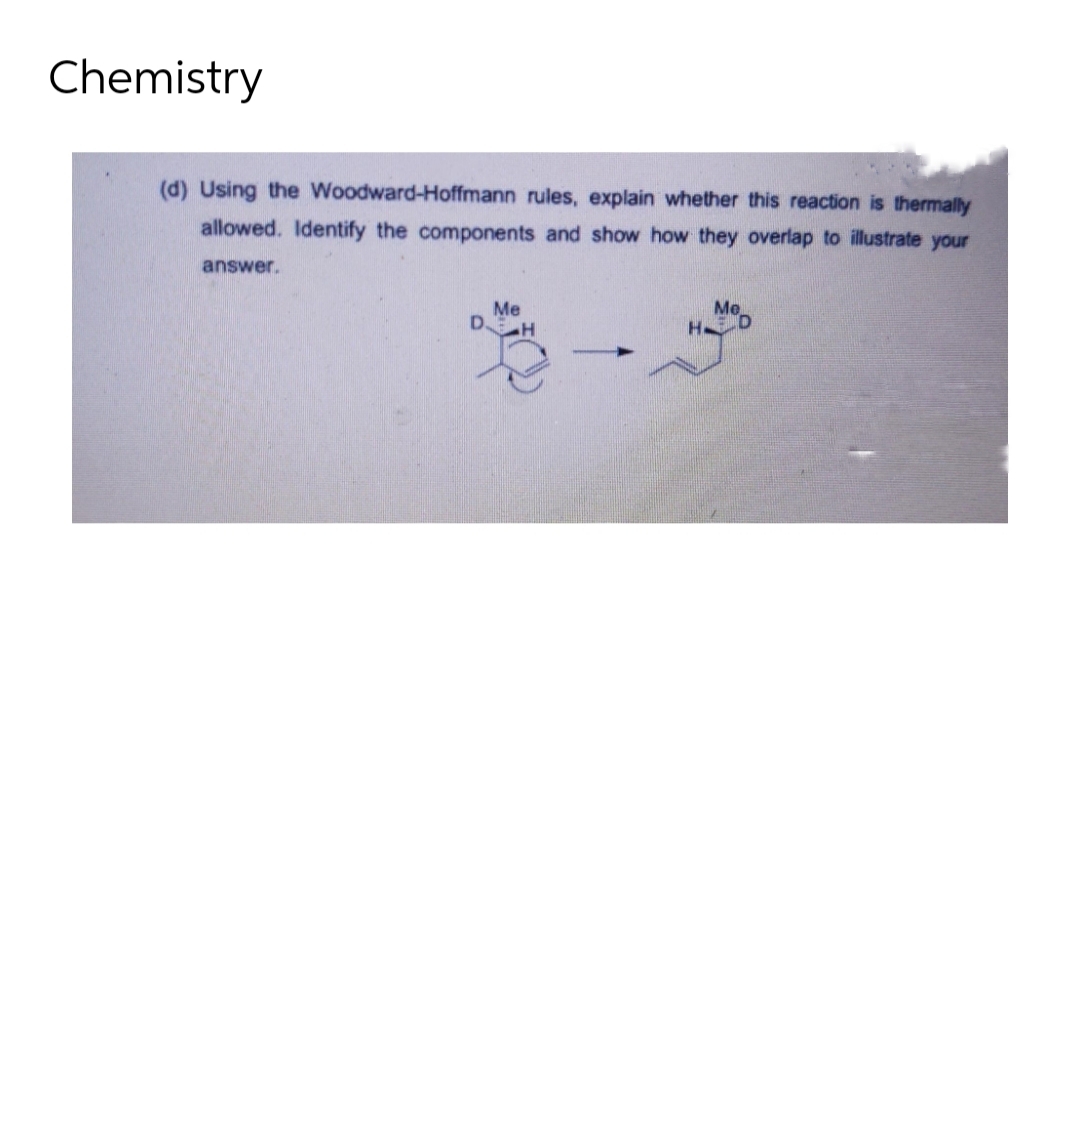 Chemistry
(d) Using the Woodward-Hoffmann rules, explain whether this reaction is thermally
allowed. Identify the components and show how they overlap to illustrate your
answer.
Me
Me
